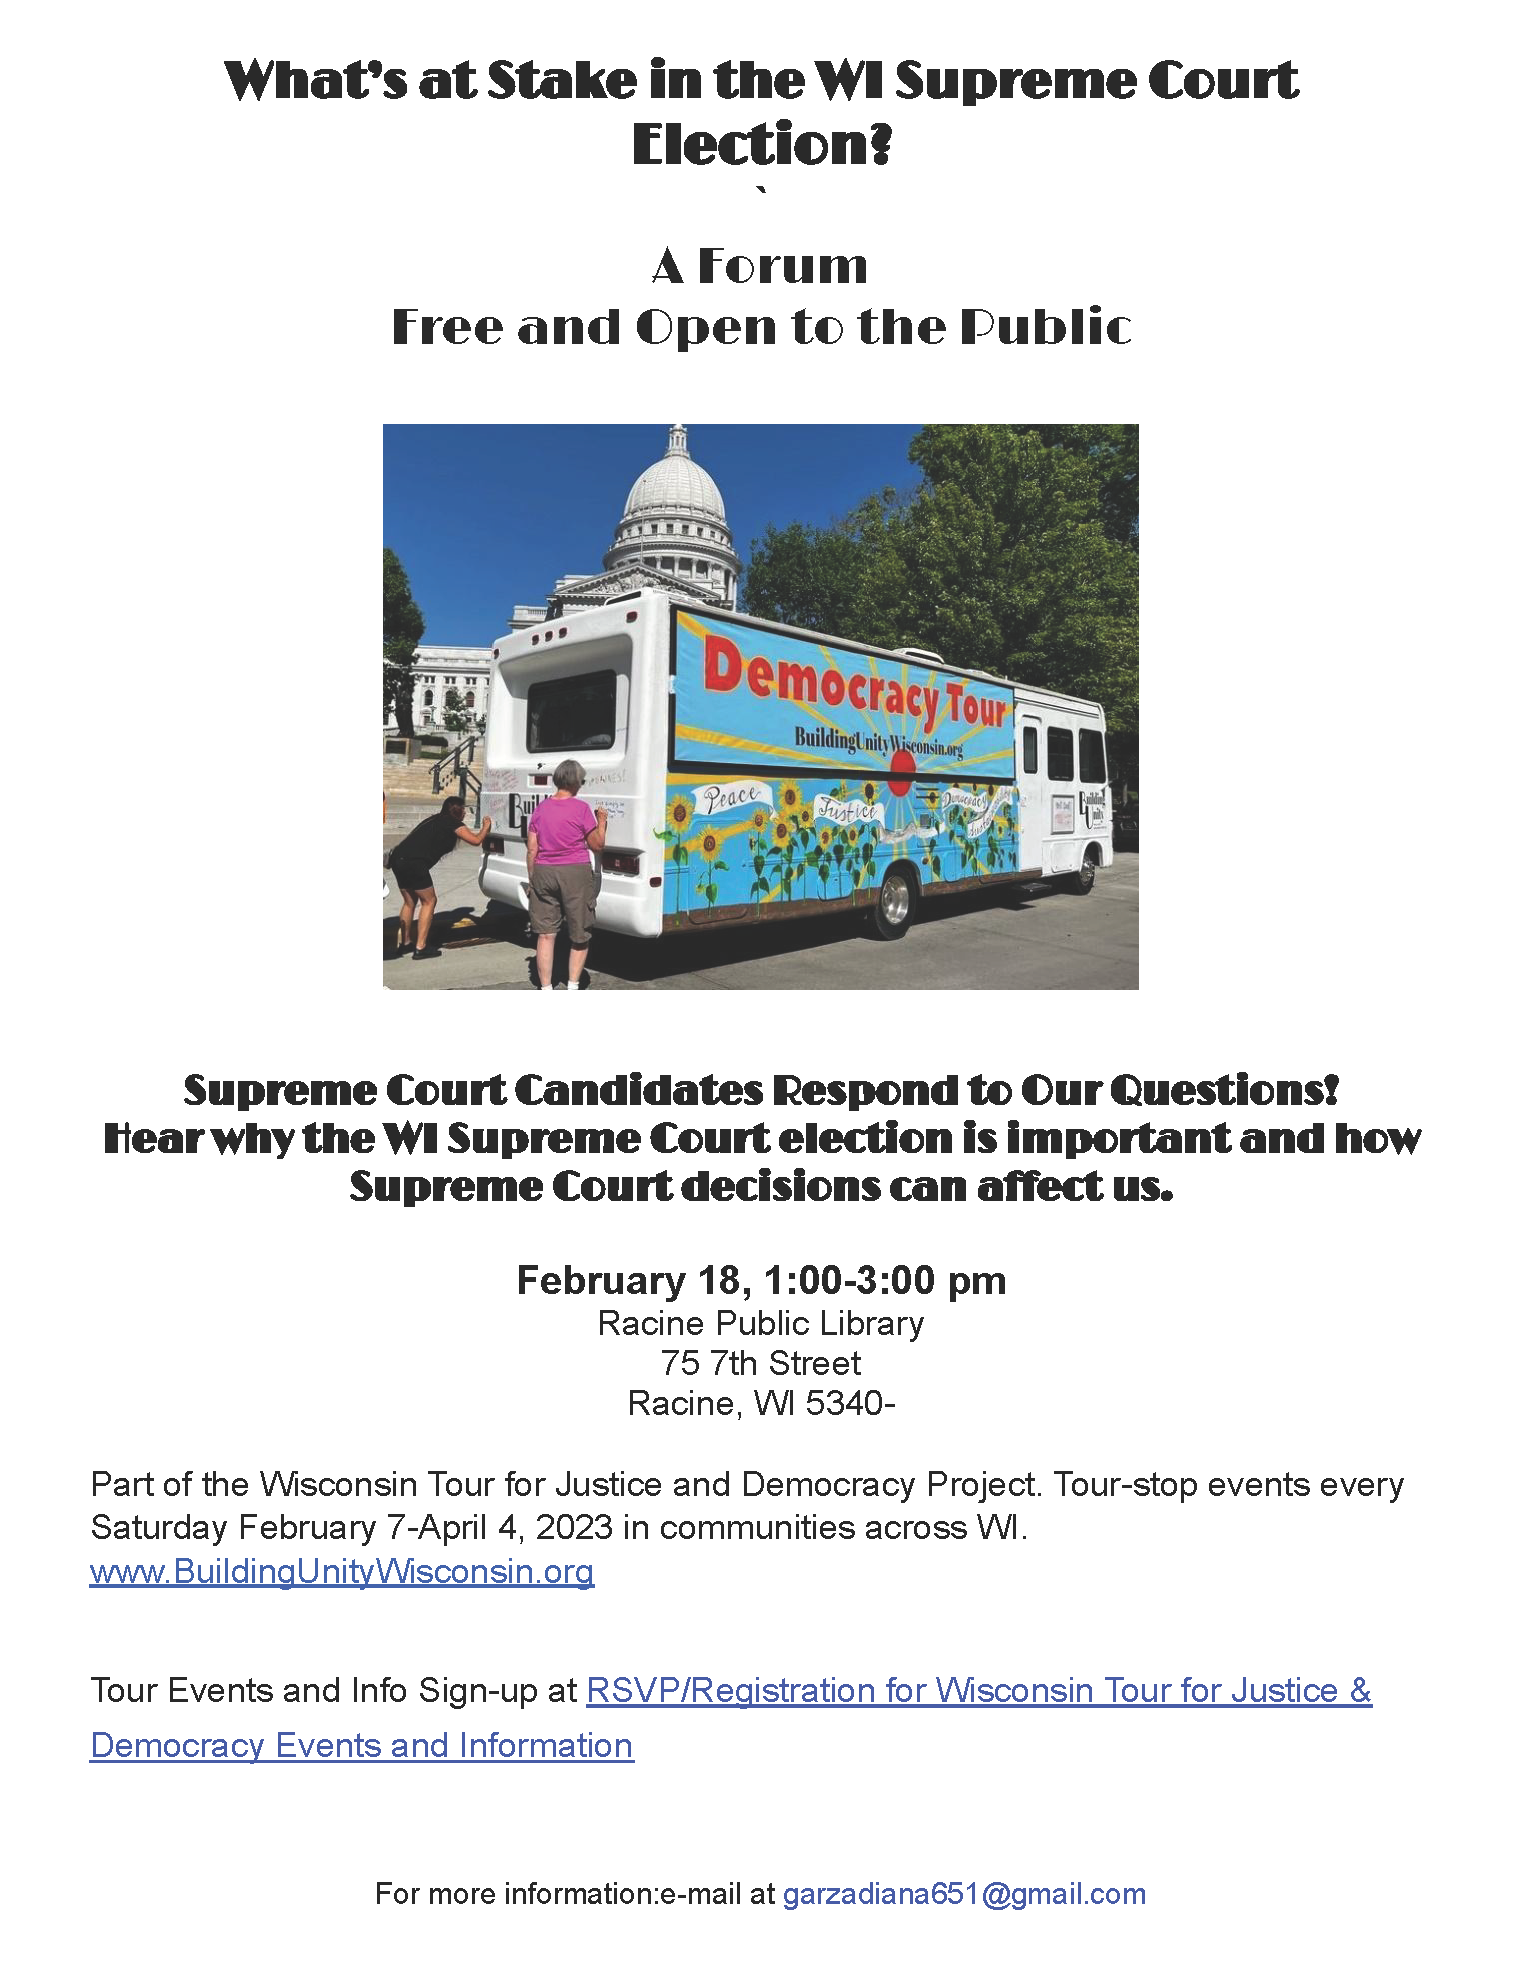 What's at stake in the WI Supreme Court election? A forum. Free and open to the public. Amidst the text is a photo of a decorated bus labeled Democracy Tour: BulidingUnityWisconsin.org, in front of the capital building. The rest of the flyer is just text. Supreme court candidates respond to our questions! Hear why the WI Supreme Court election is important and how Supreme Court decisions can affect us. February 18, 1-3 p.m. Racine Public Library. 75 7th Street, Racine, WI 53403. Part of the Wisconsin Tour for Justice and Democracy Project. Tour-stop events every Saturday February 7-April 4, 2023 in communities across WI. www.BuildingUnityWisconsin.org. Tour Events and Info Sign-up at RSVP/Registration for Wisconsin Tour for Justice & Democracy Events and Information. (This text links to TinyURL.com/SignUp4TourEventsAndInfo.) For more information: e-mail at GarzaDiana651@gmail.com.